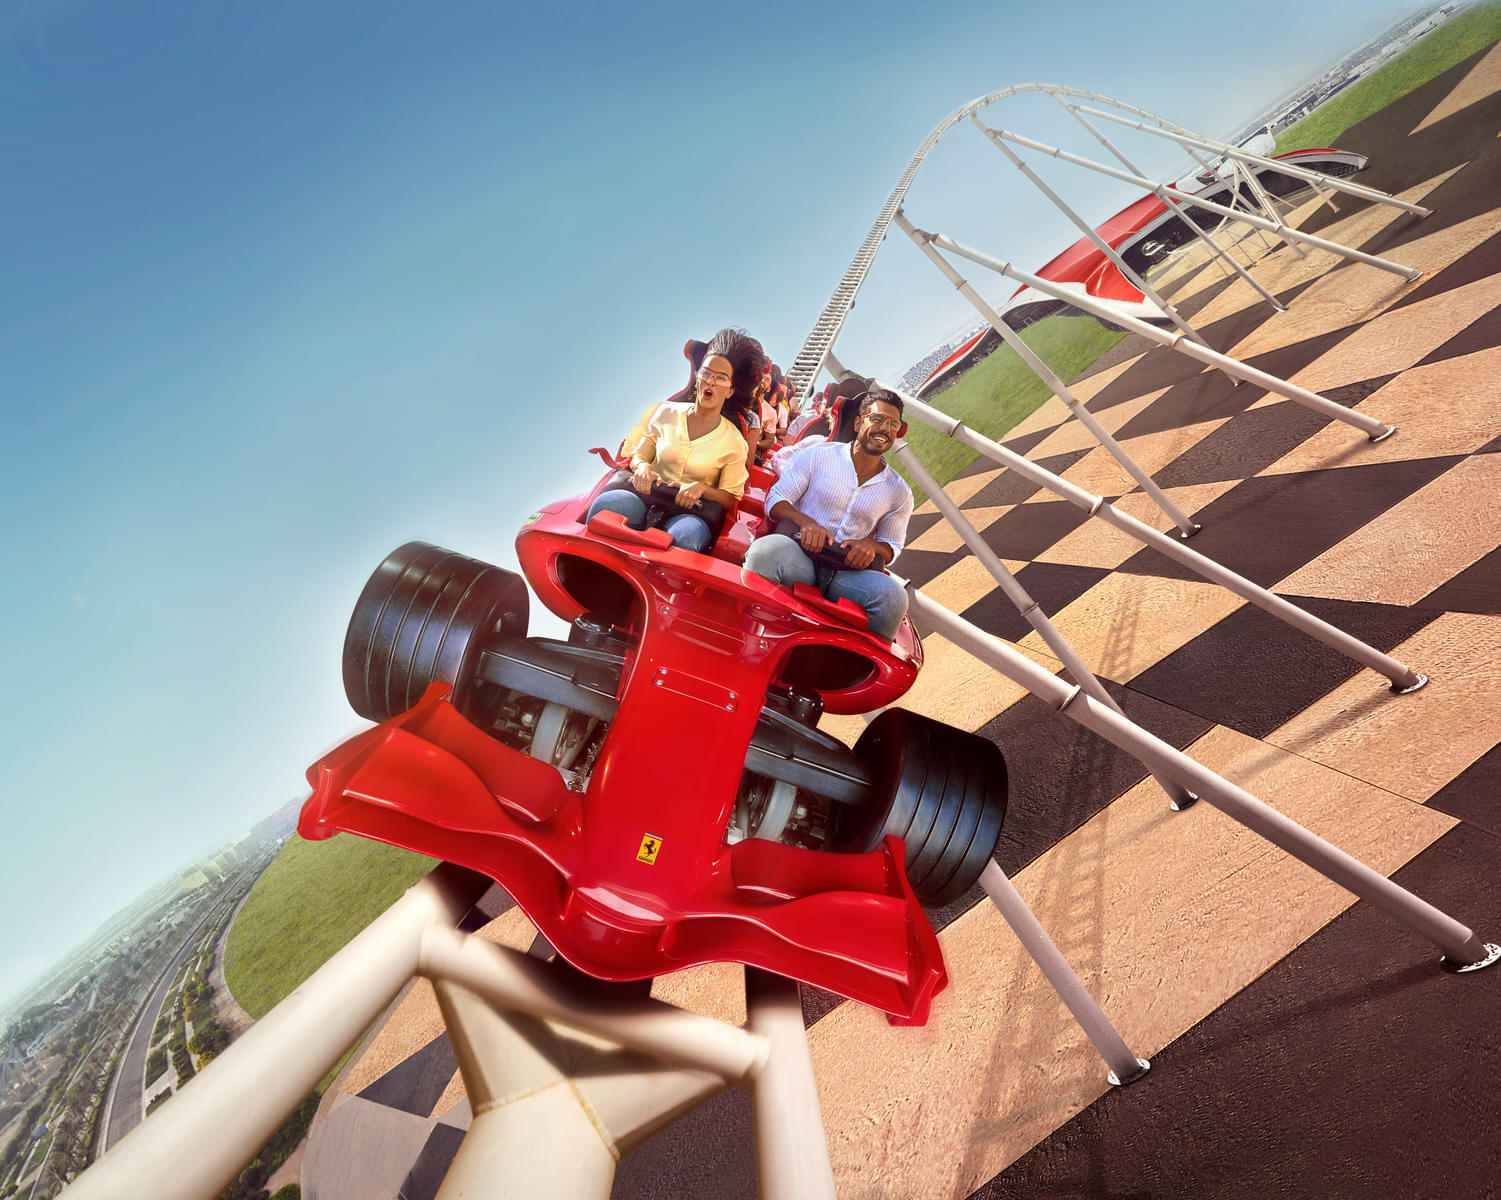 Let the adrenaline rush in as you ride the Formula Rossa